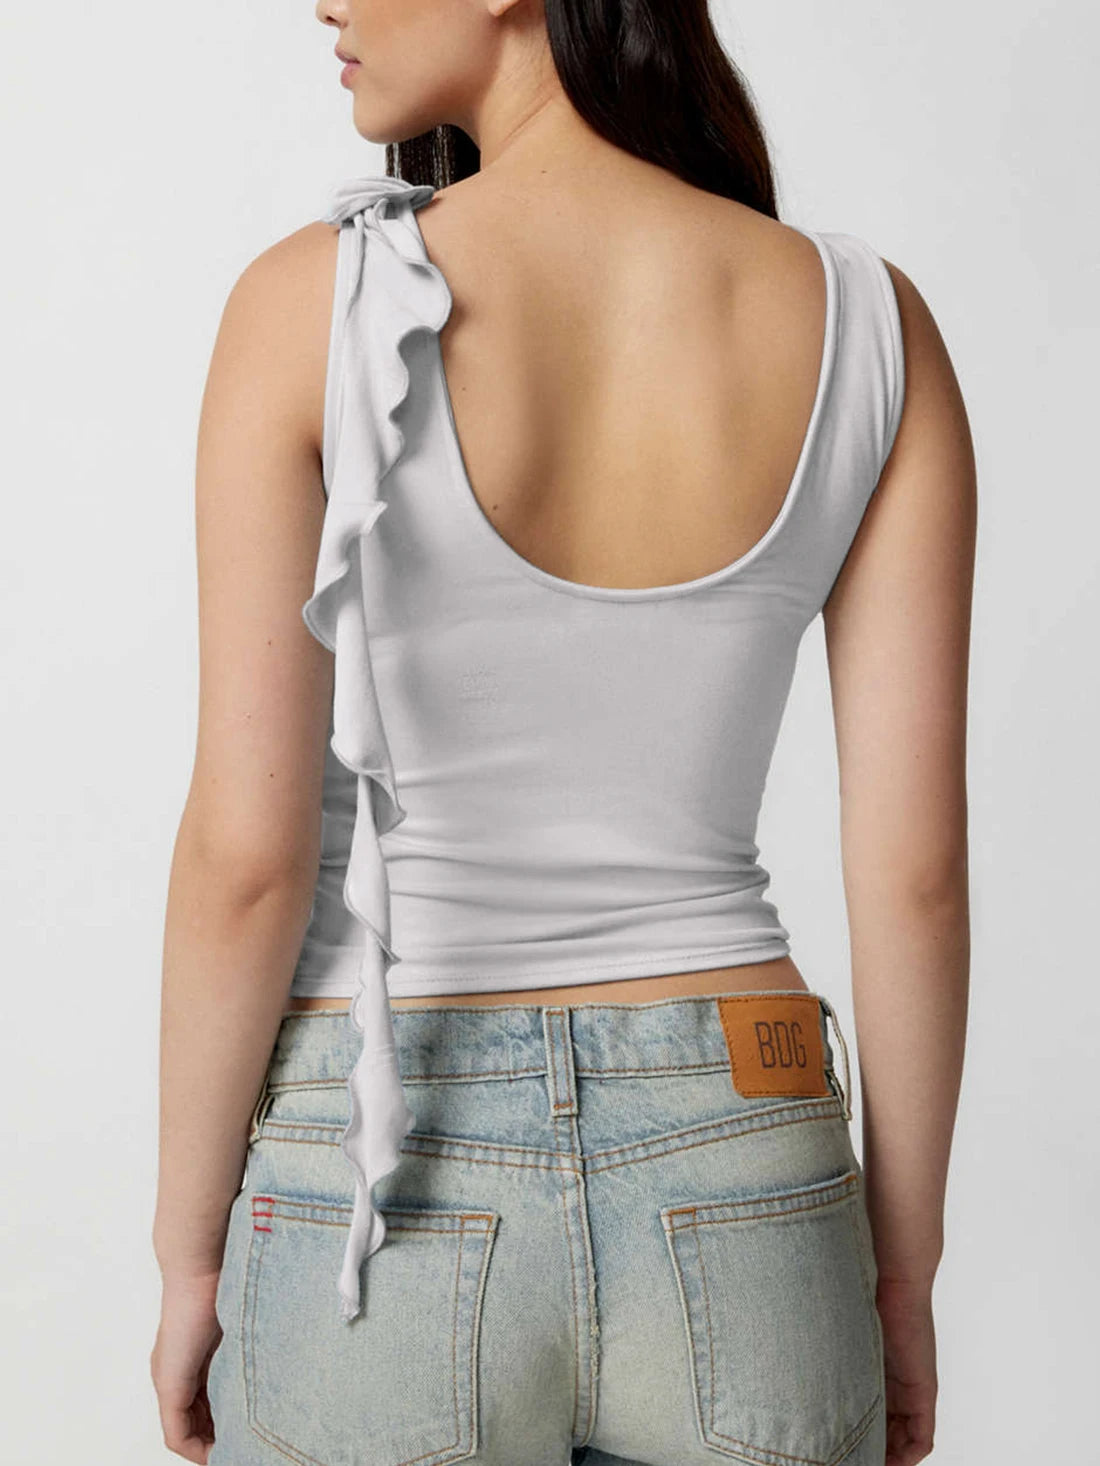 Women's sleeveless top with a round back and a ruffled bow on one shoulder